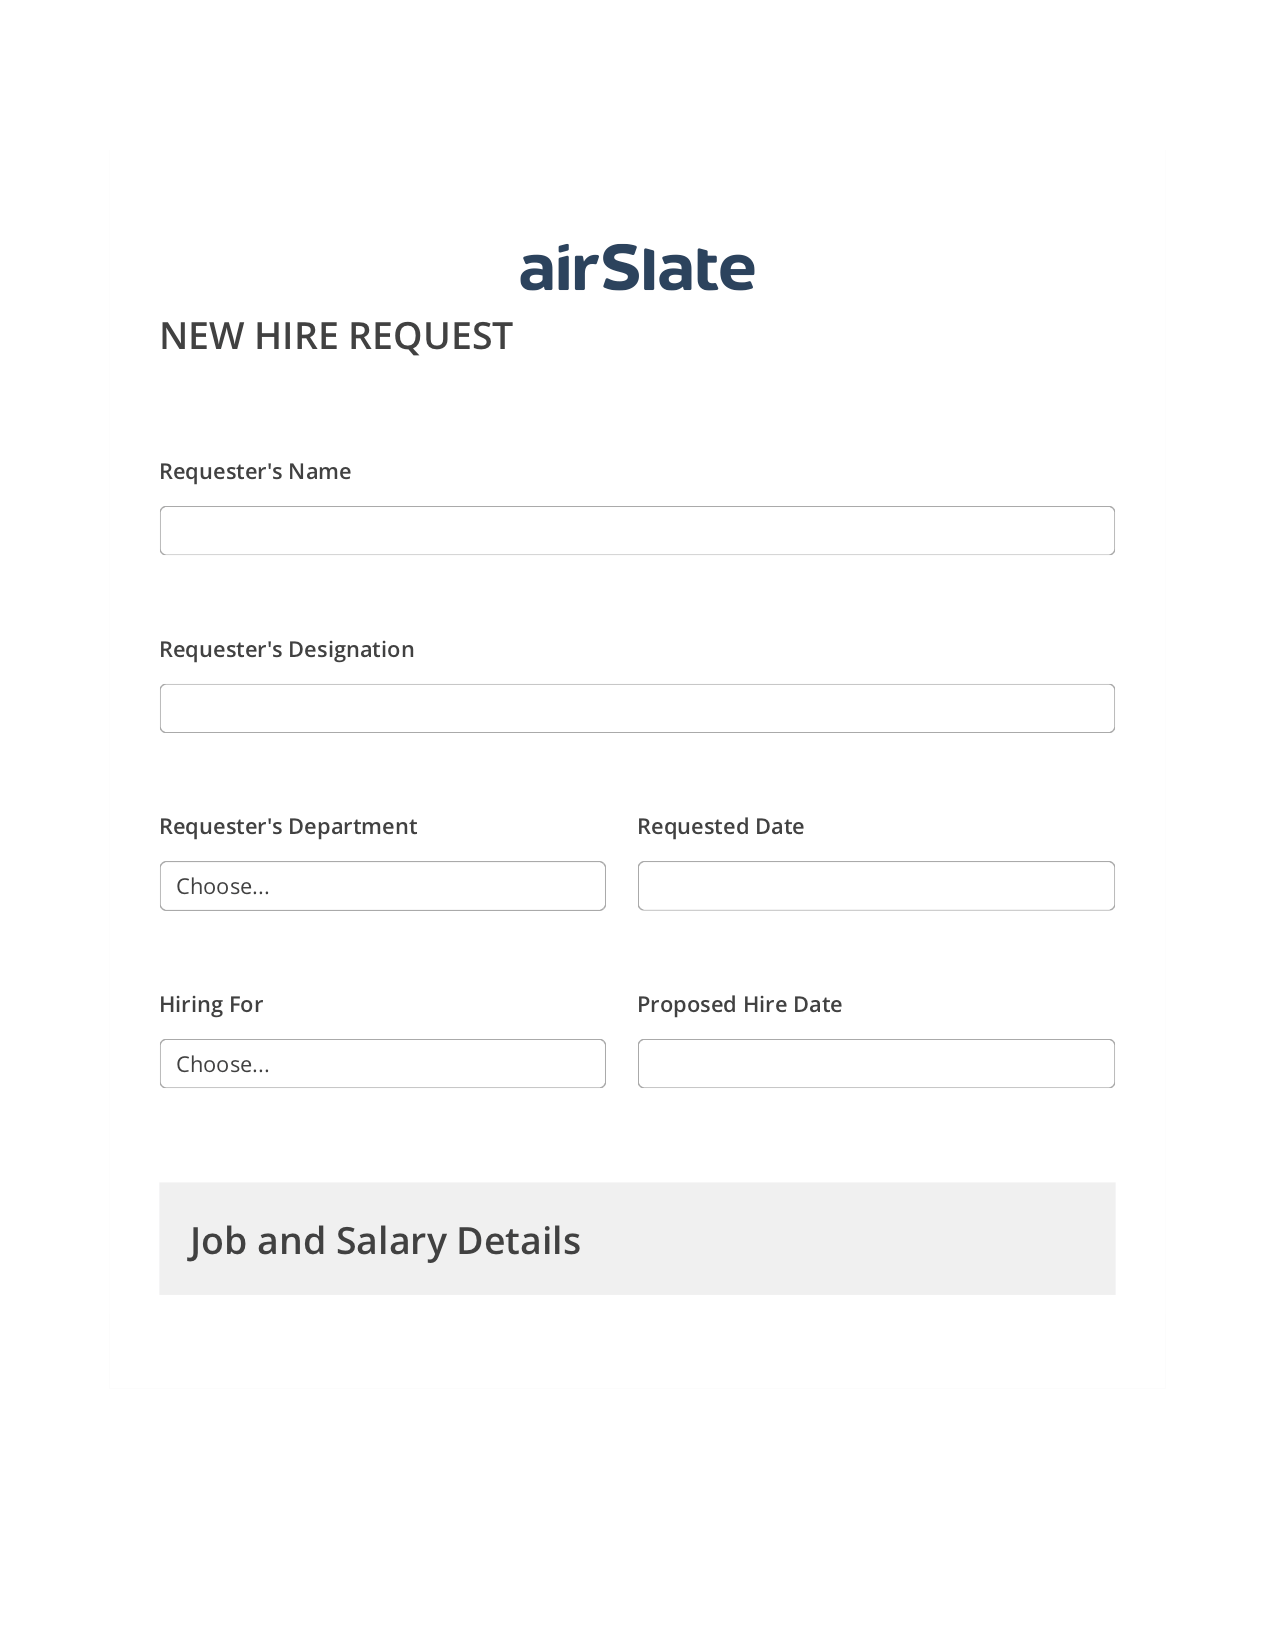 Multirole Hiring Request Workflow Pre-fill from Excel Spreadsheet Bot, Create slate addon, Export to NetSuite Bot